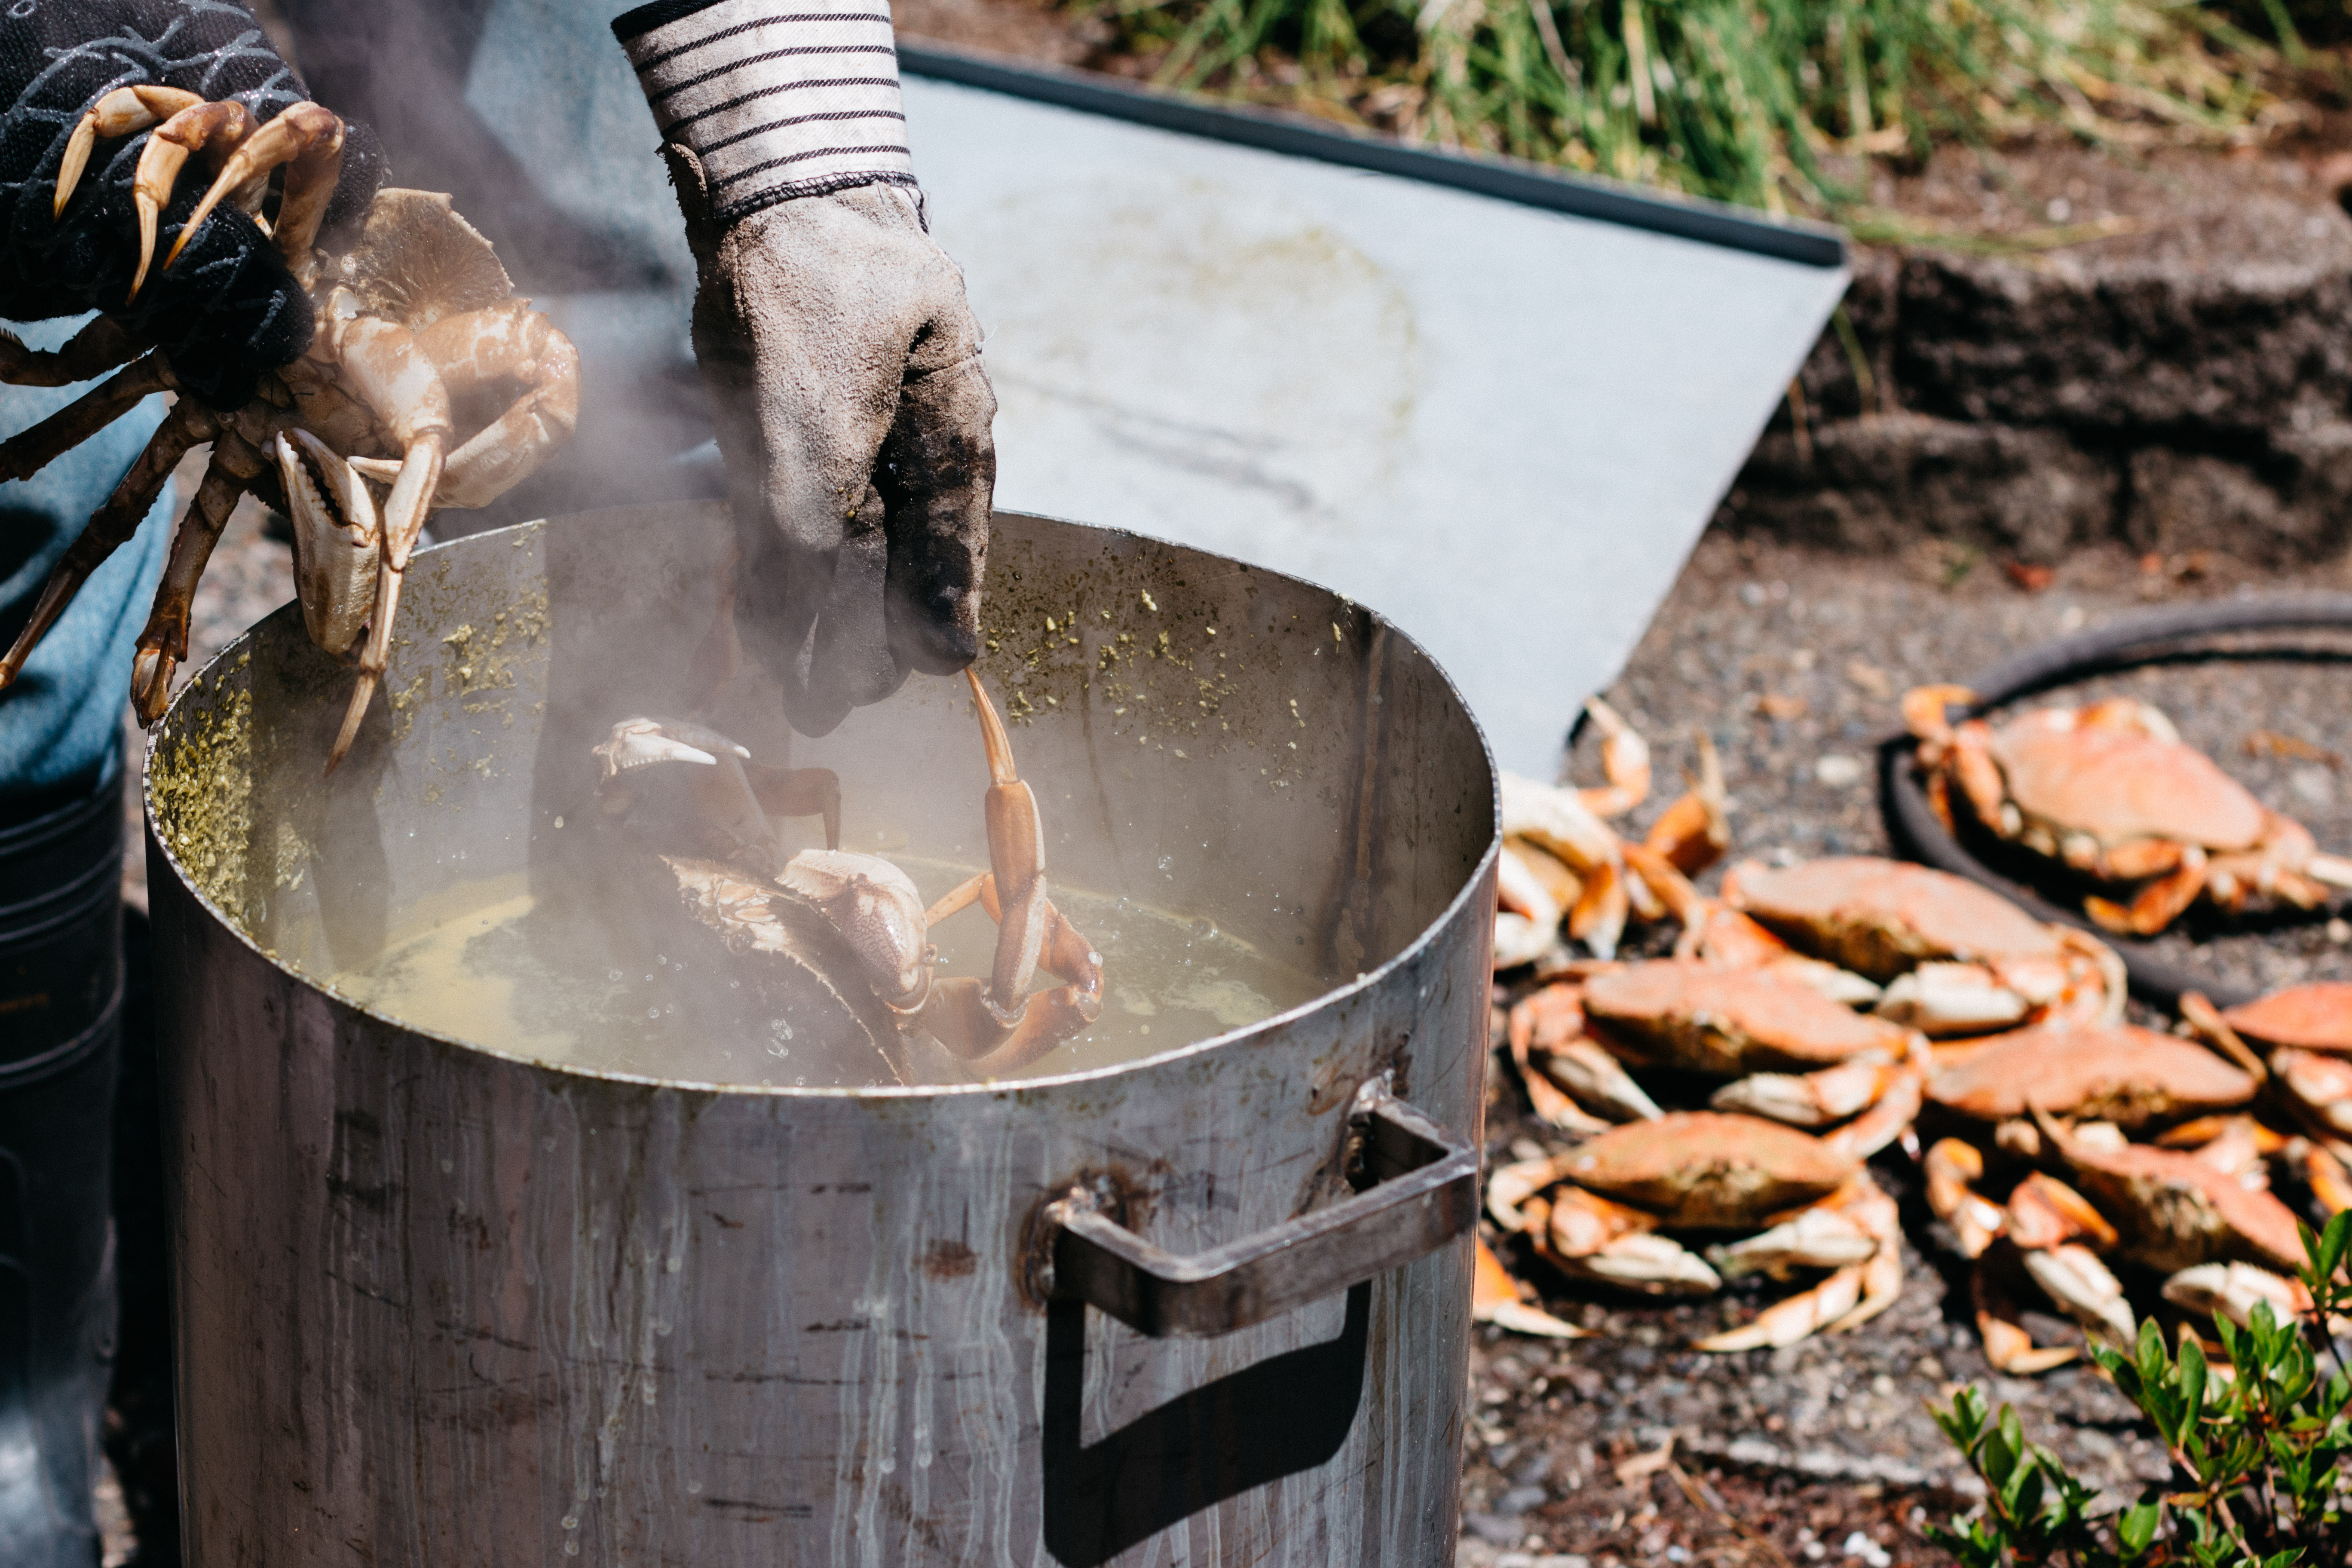 Learn how to prepare Dungeness crab + Video. | How to Cook | Seafood | Shellfish | Oregon | Fish & Wildlife | Ocean Life | www.megiswell.com